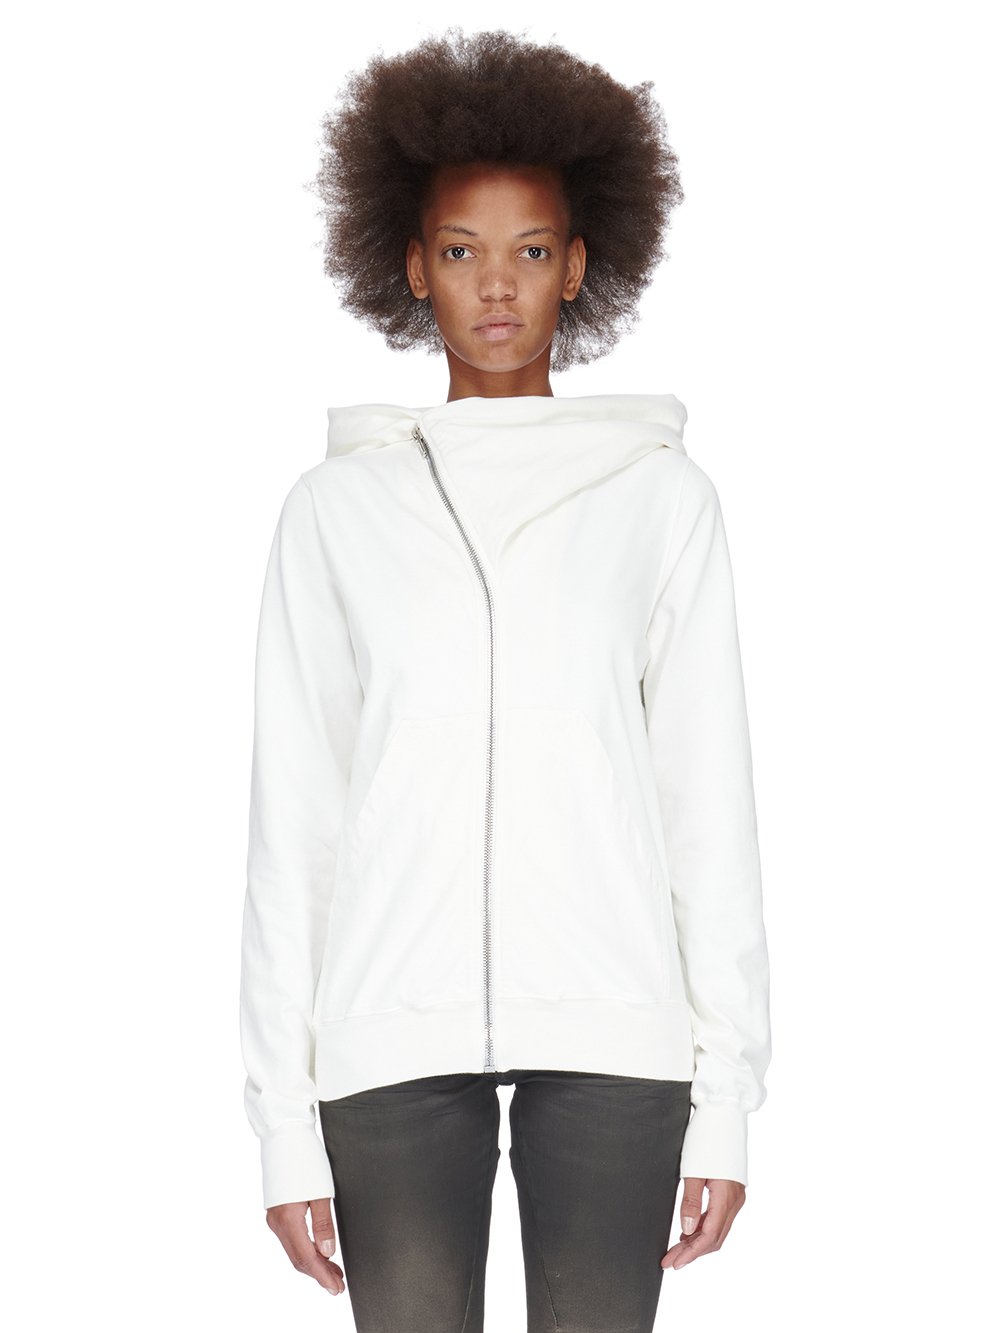 RICK OWENS FW23 LUXOR MOUNTAIN HOODIE IN COMPACT HEAVY COTTON JERSEY